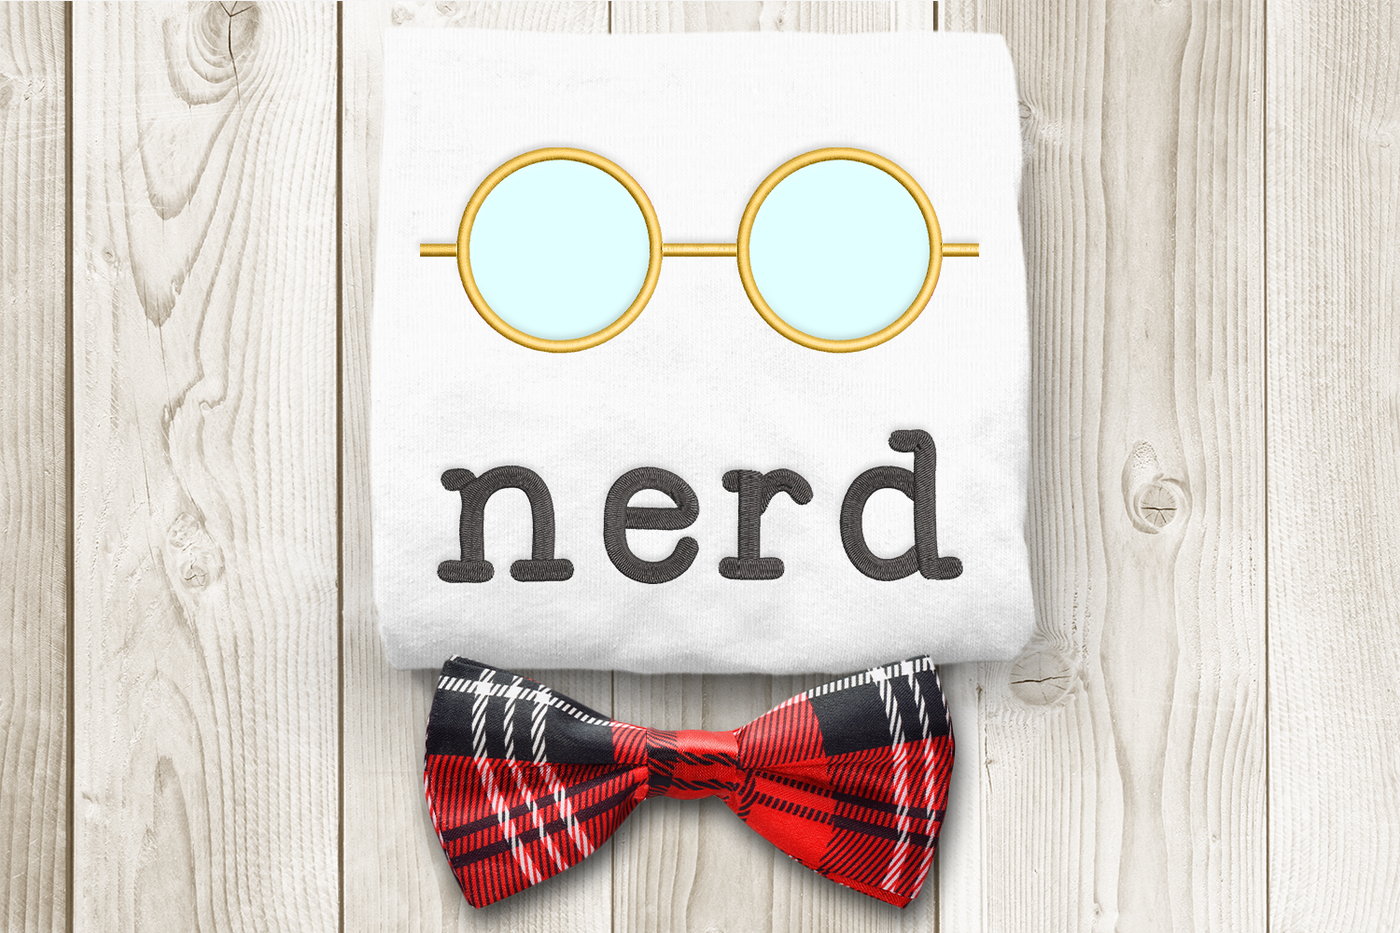 Embroidery design of round glasses with the word "nerd" below. Shown with applique fabric in the lenses.